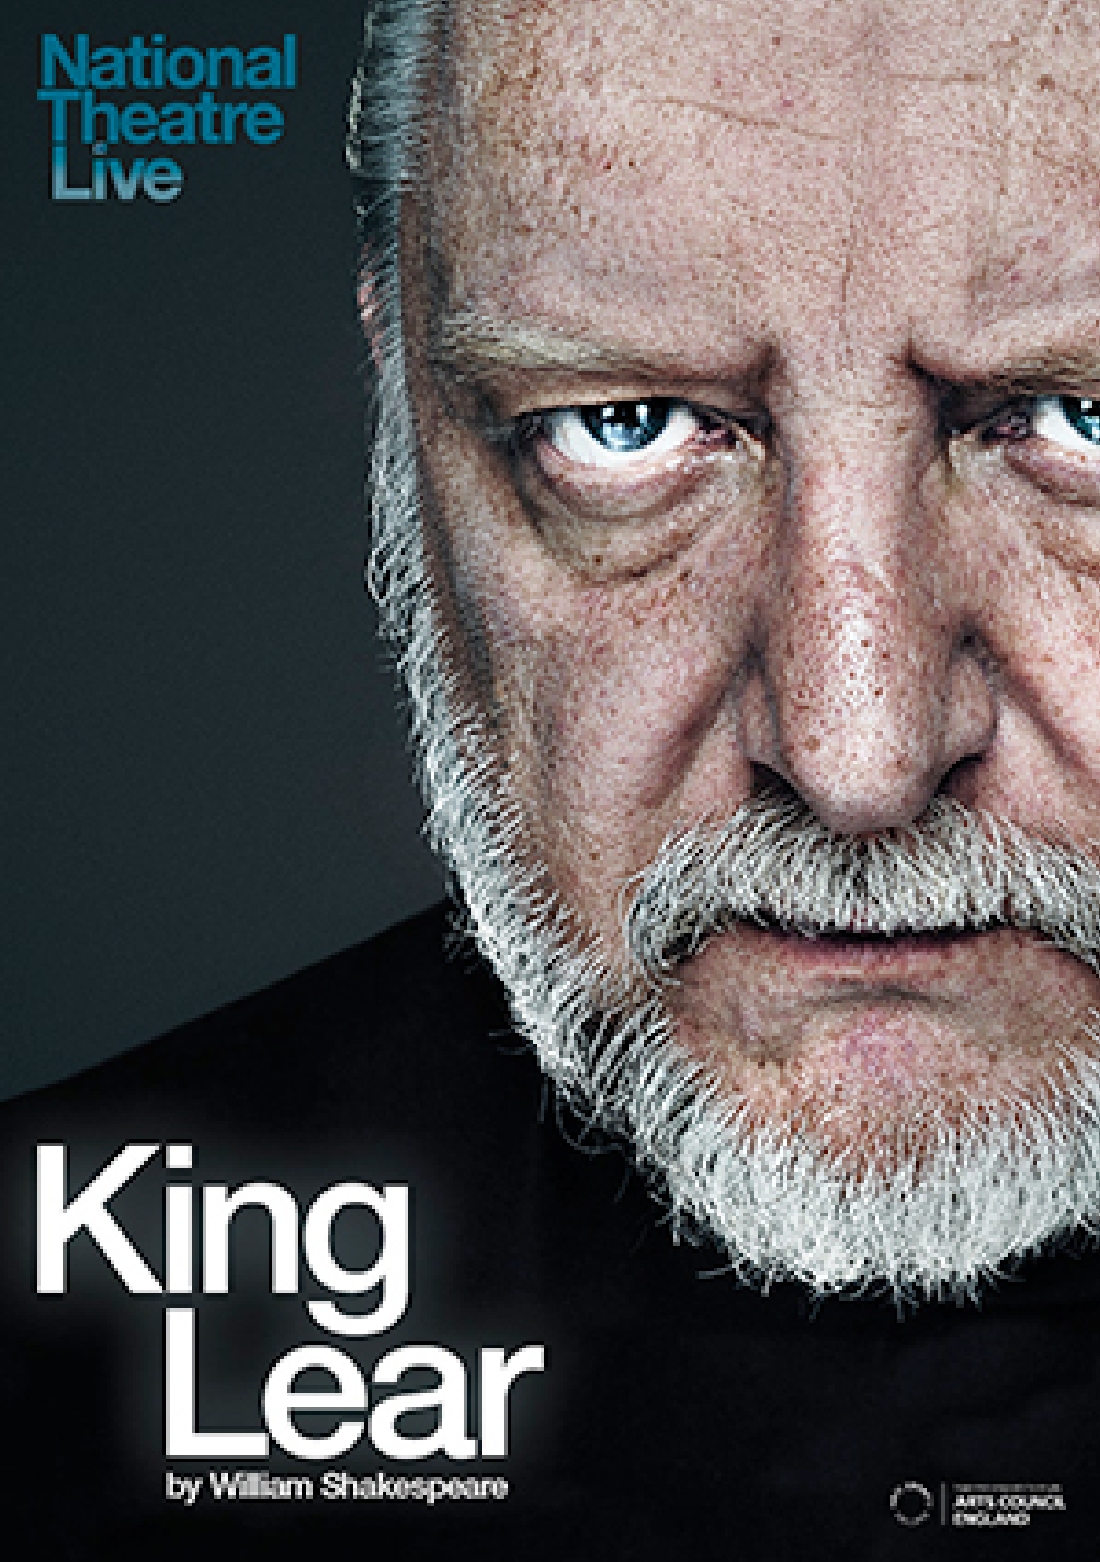 National Theatre Live brings King Lear to the Modern Art Museum of Fort Worth on Wednesday.